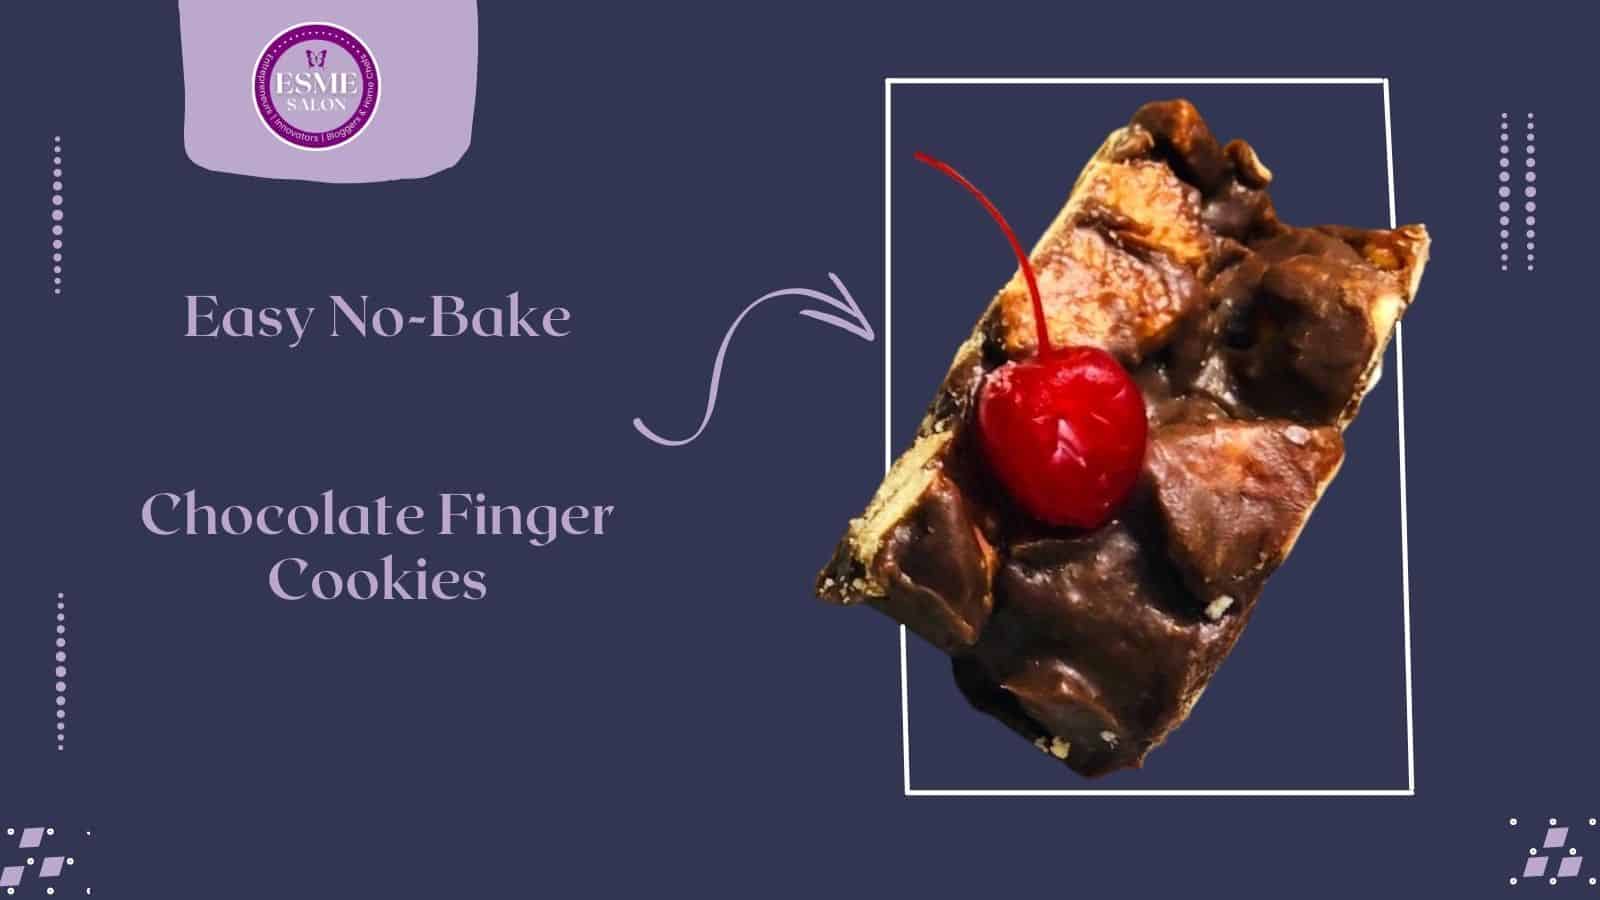 A single slice of Chocolate condensed milk cookie fingers with red maraschino cherries